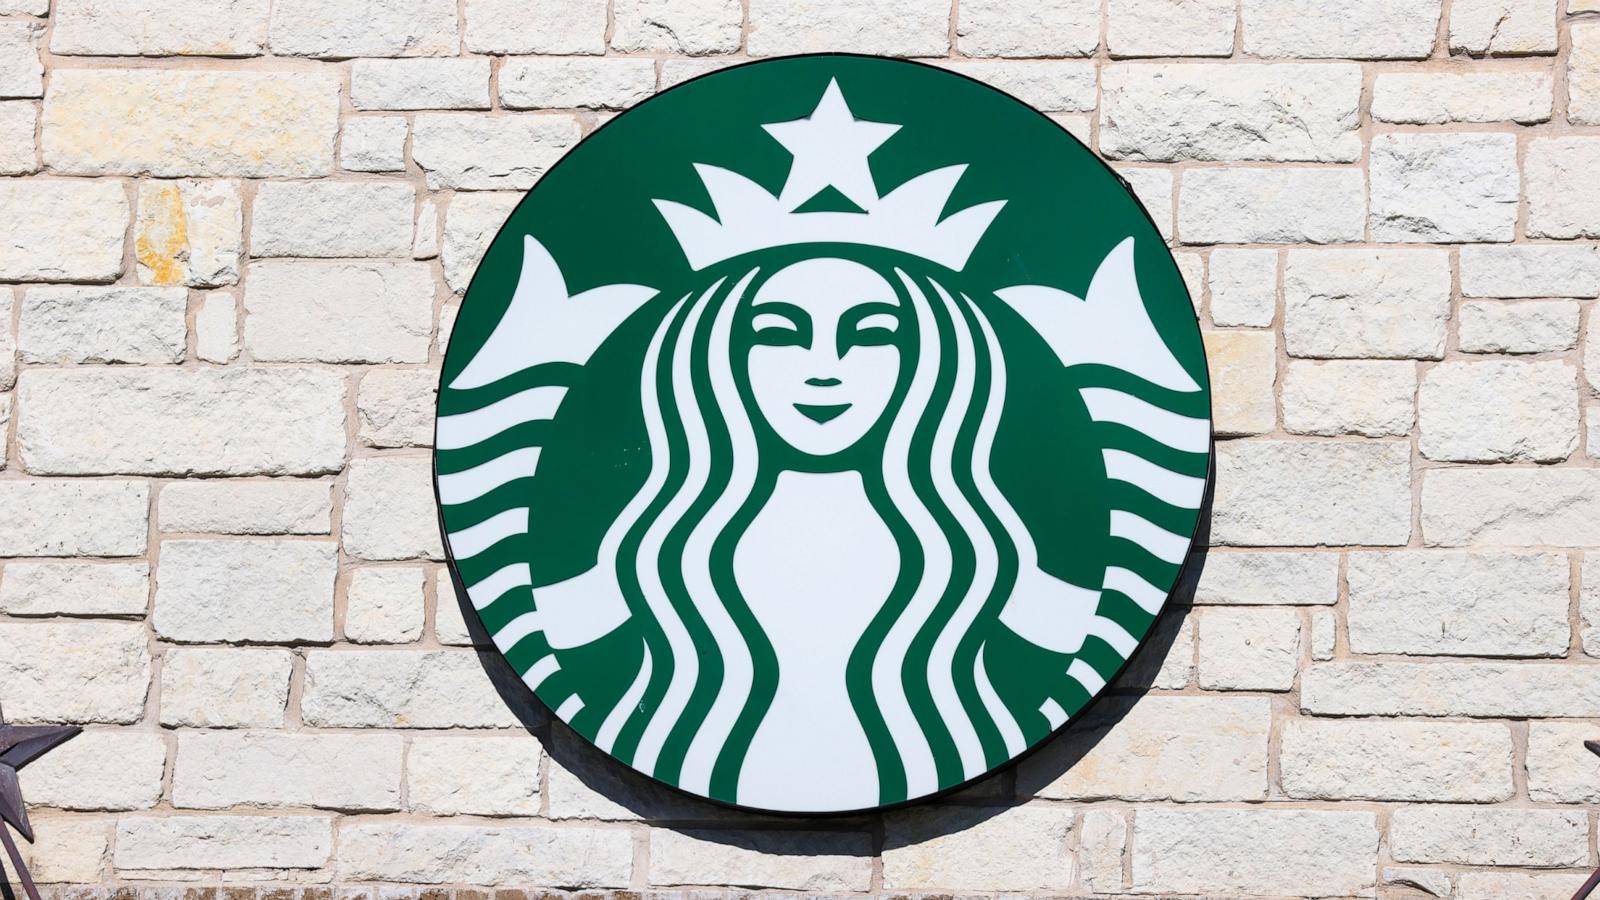 Starbucks wants to encourage reusable cups. Will customers go along?